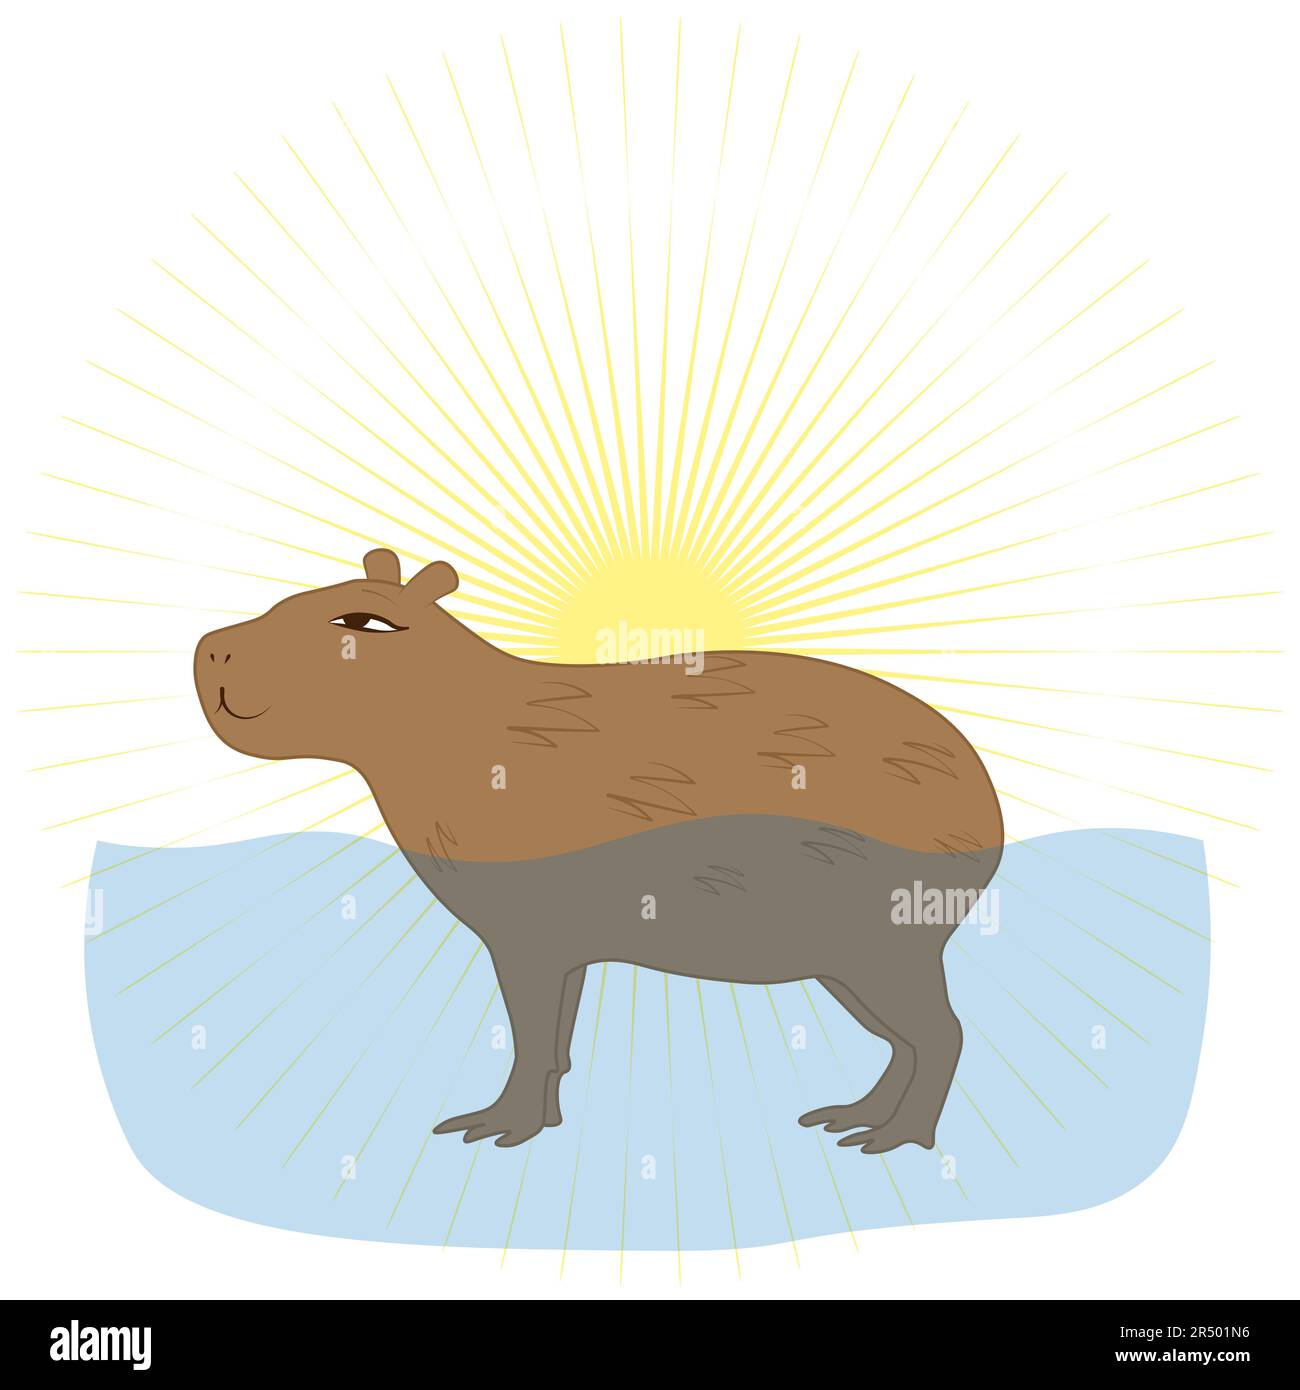 Satisfied capybara against the background of the sun Stock Vector